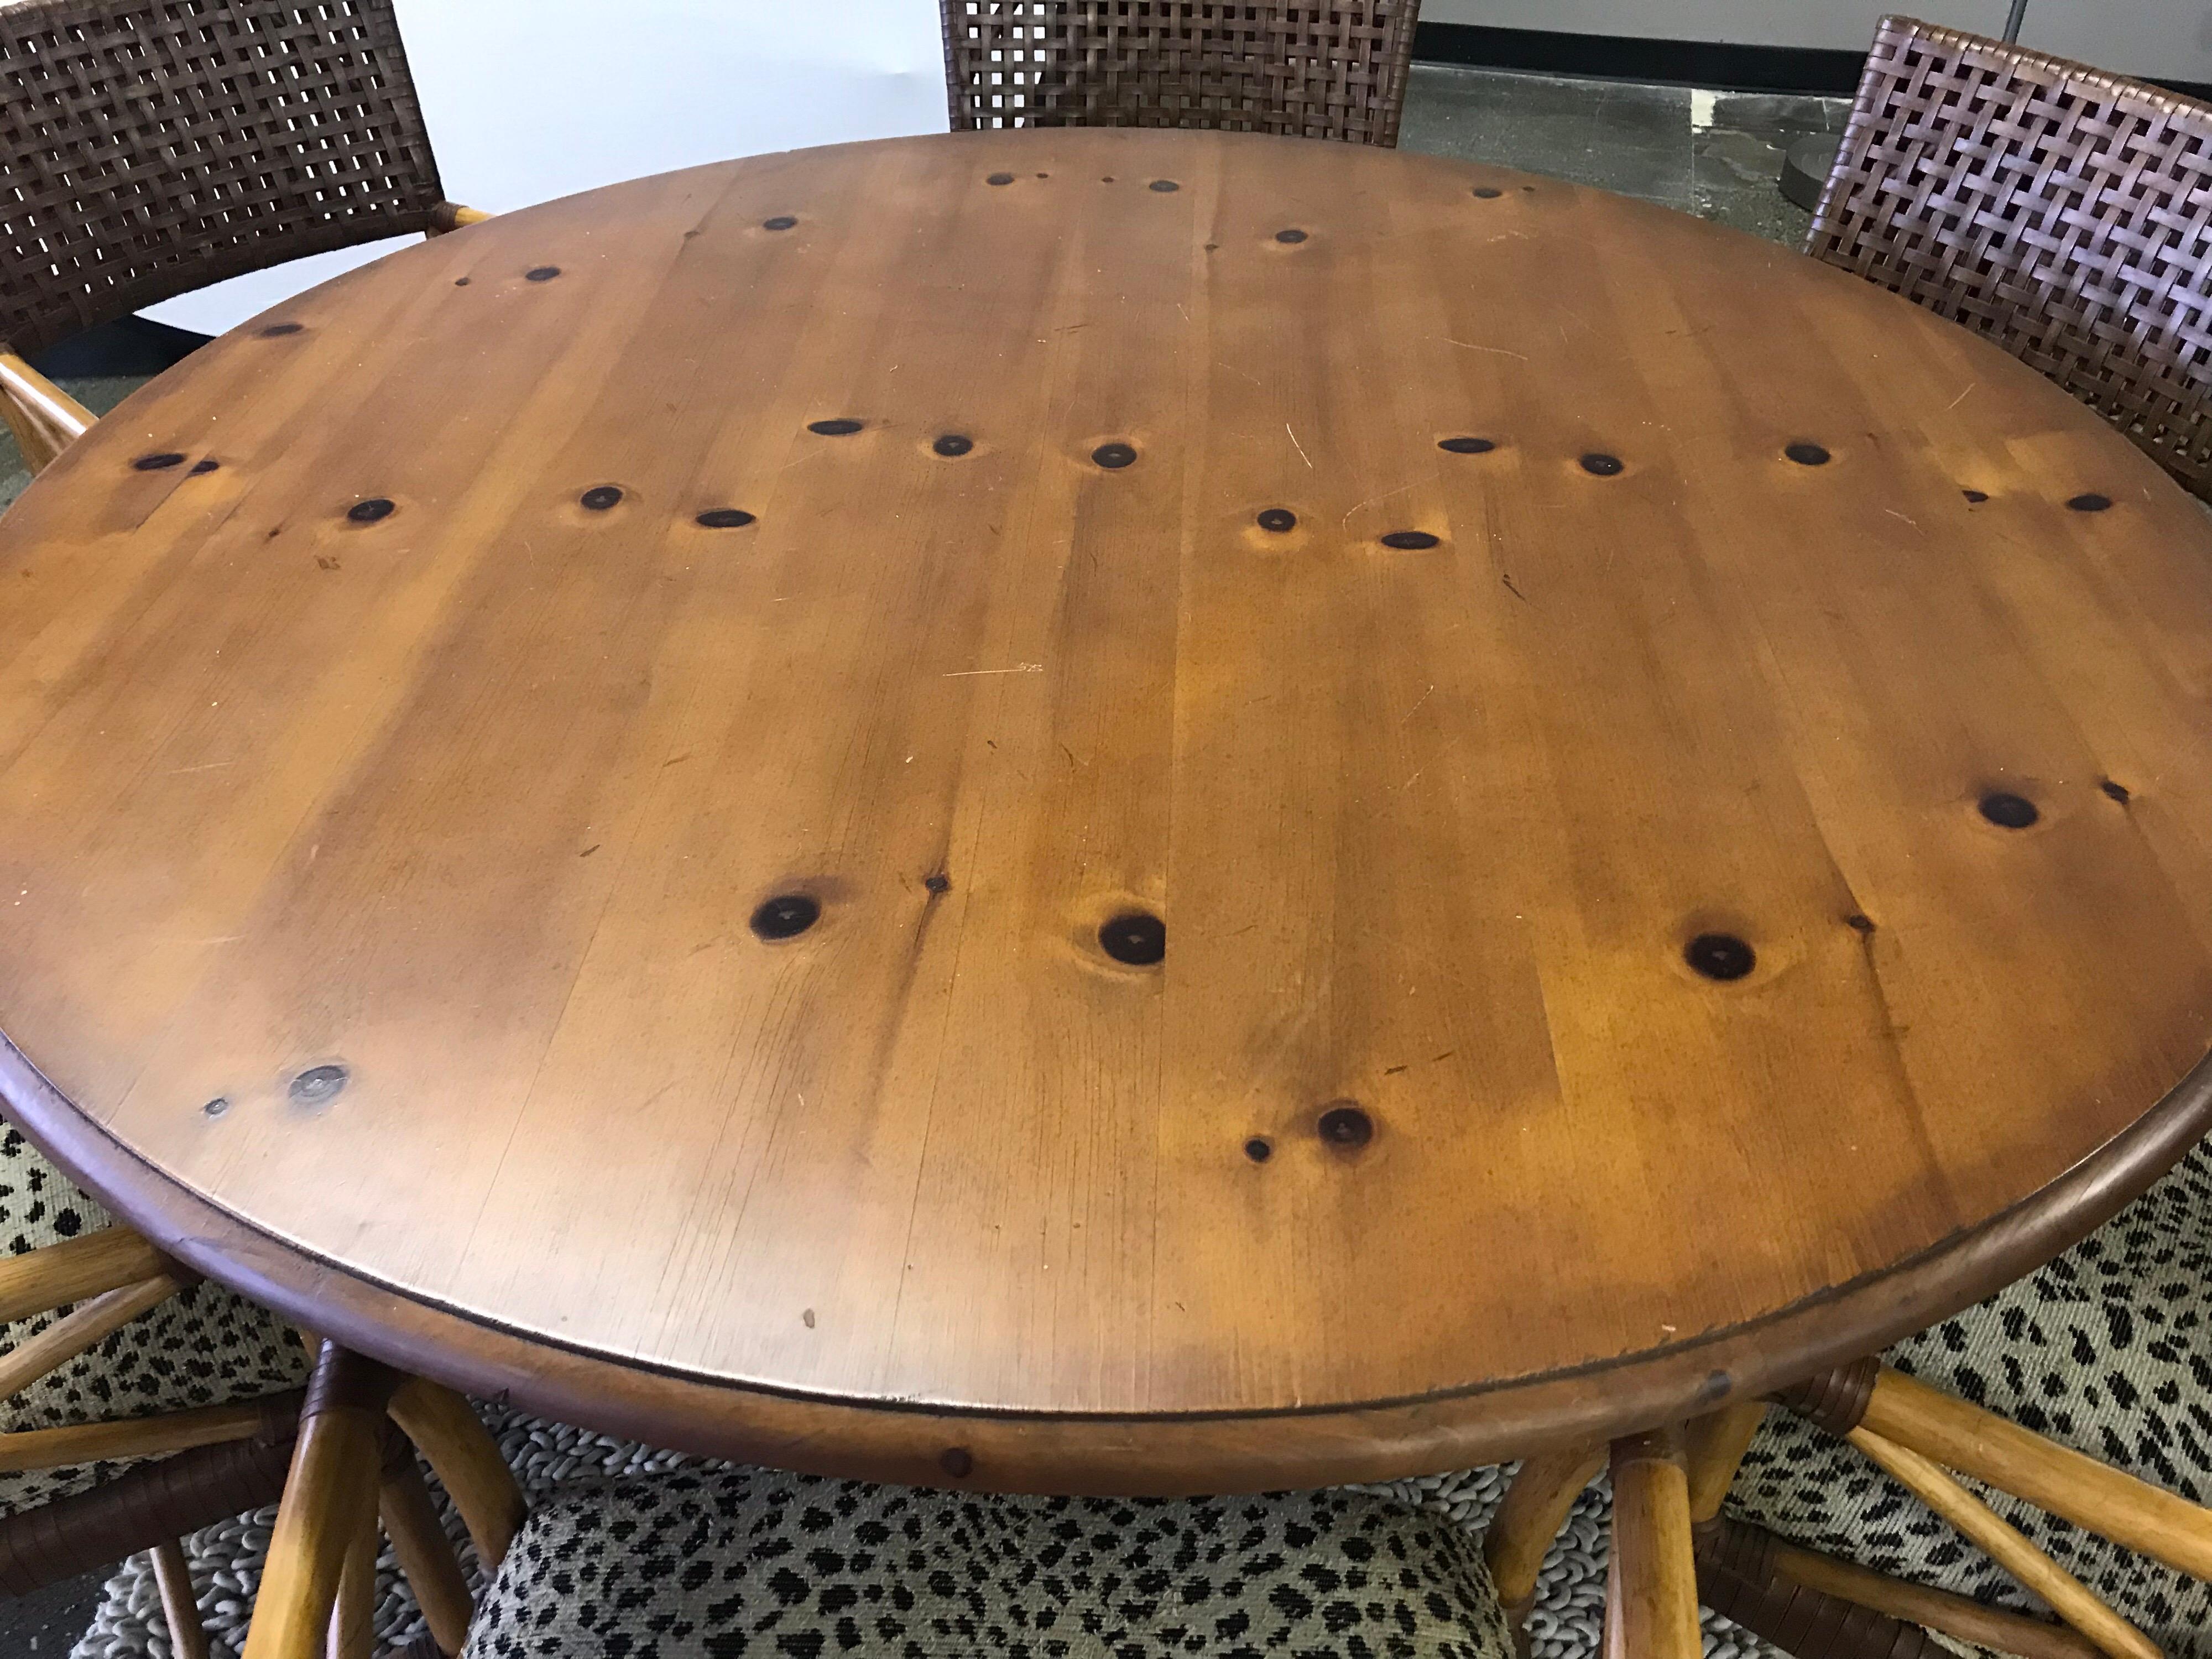 This casual Hickory White dining set includes a round table and six matching chairs. Chairs feature woven leather, bamboo and leopard seat fabric and are in mint condition. The round pine table top rests on a distressed black wood base and is five